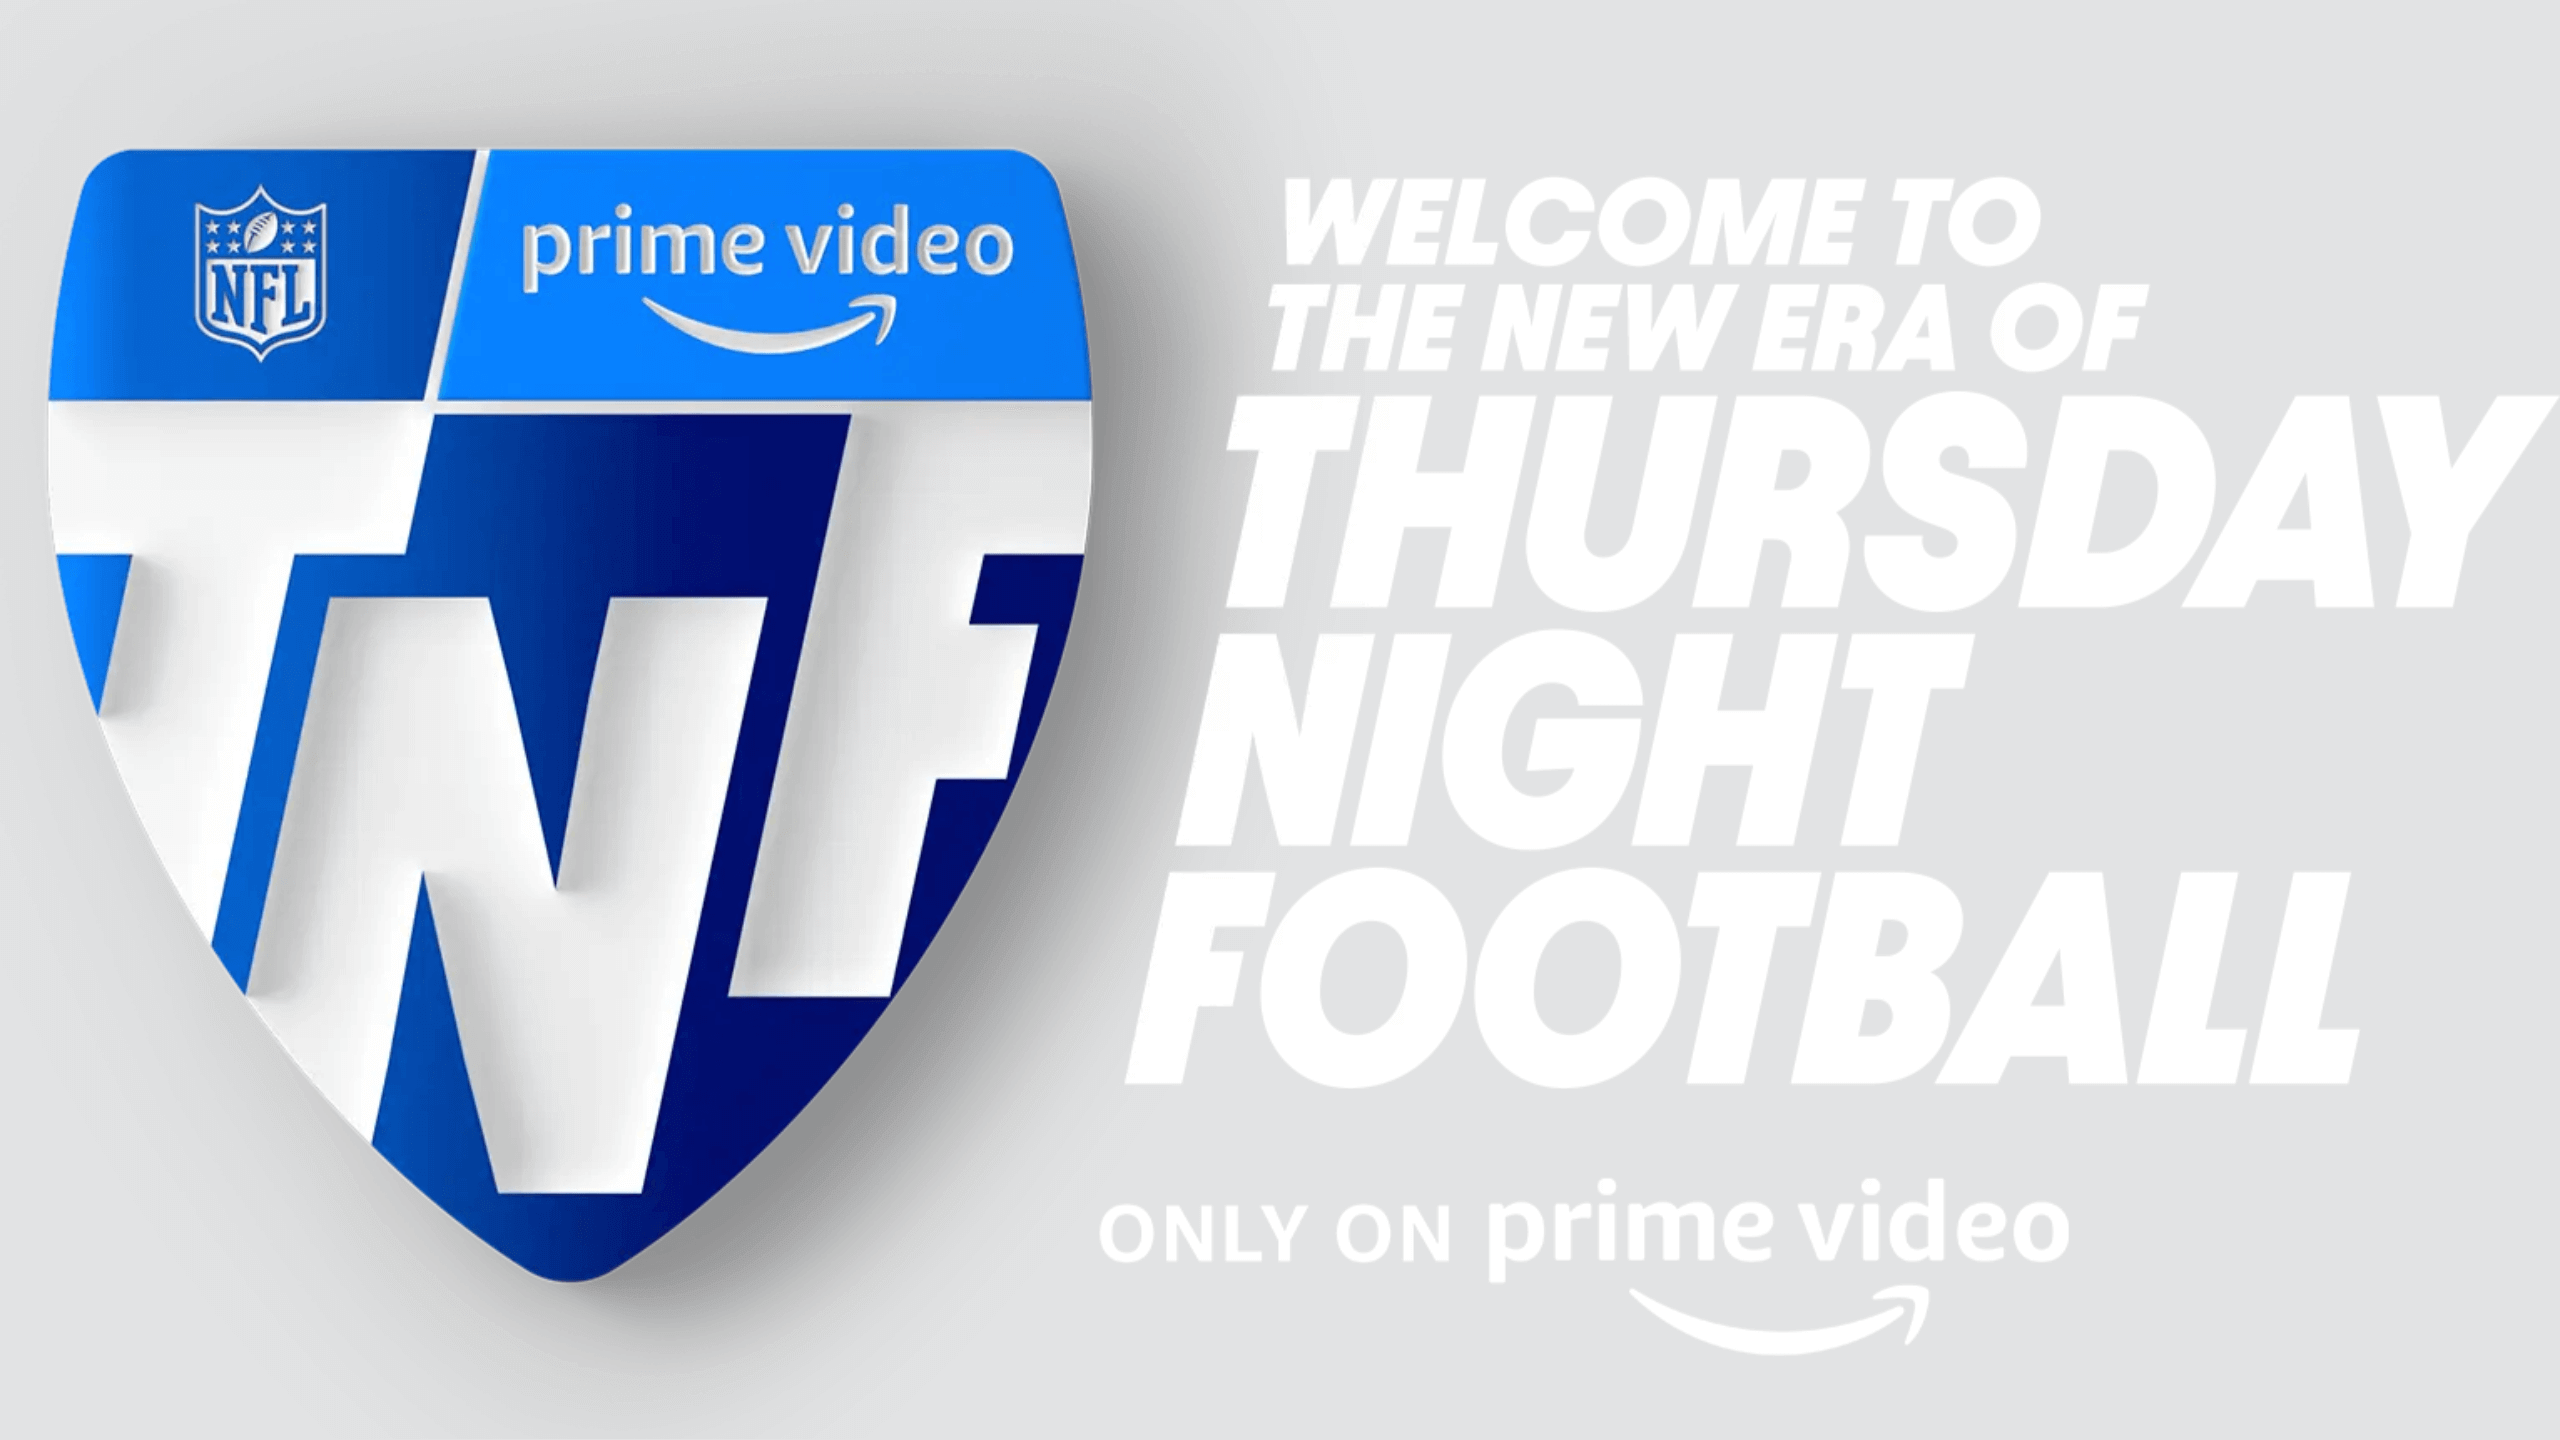 what two teams are playing on thursday night football tonight